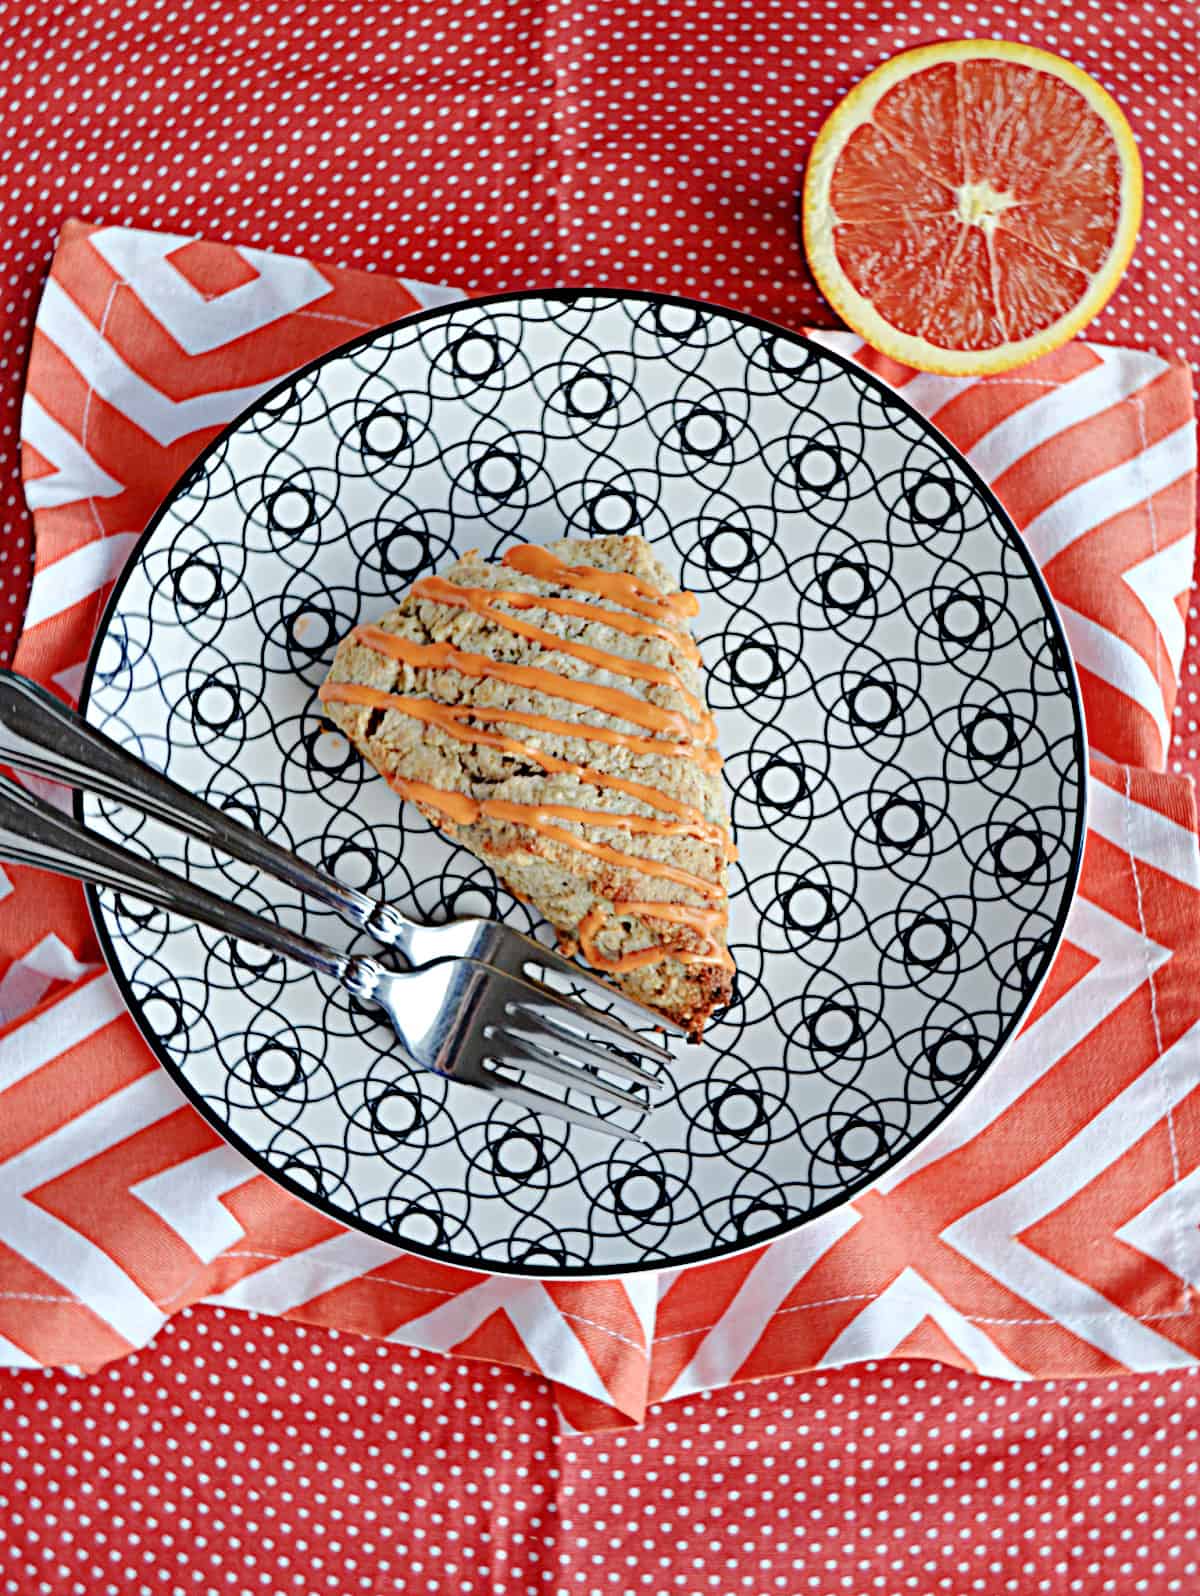 A plate with a scones drizzled with glaze, 2 forks on the plate, and an orange in the background. 